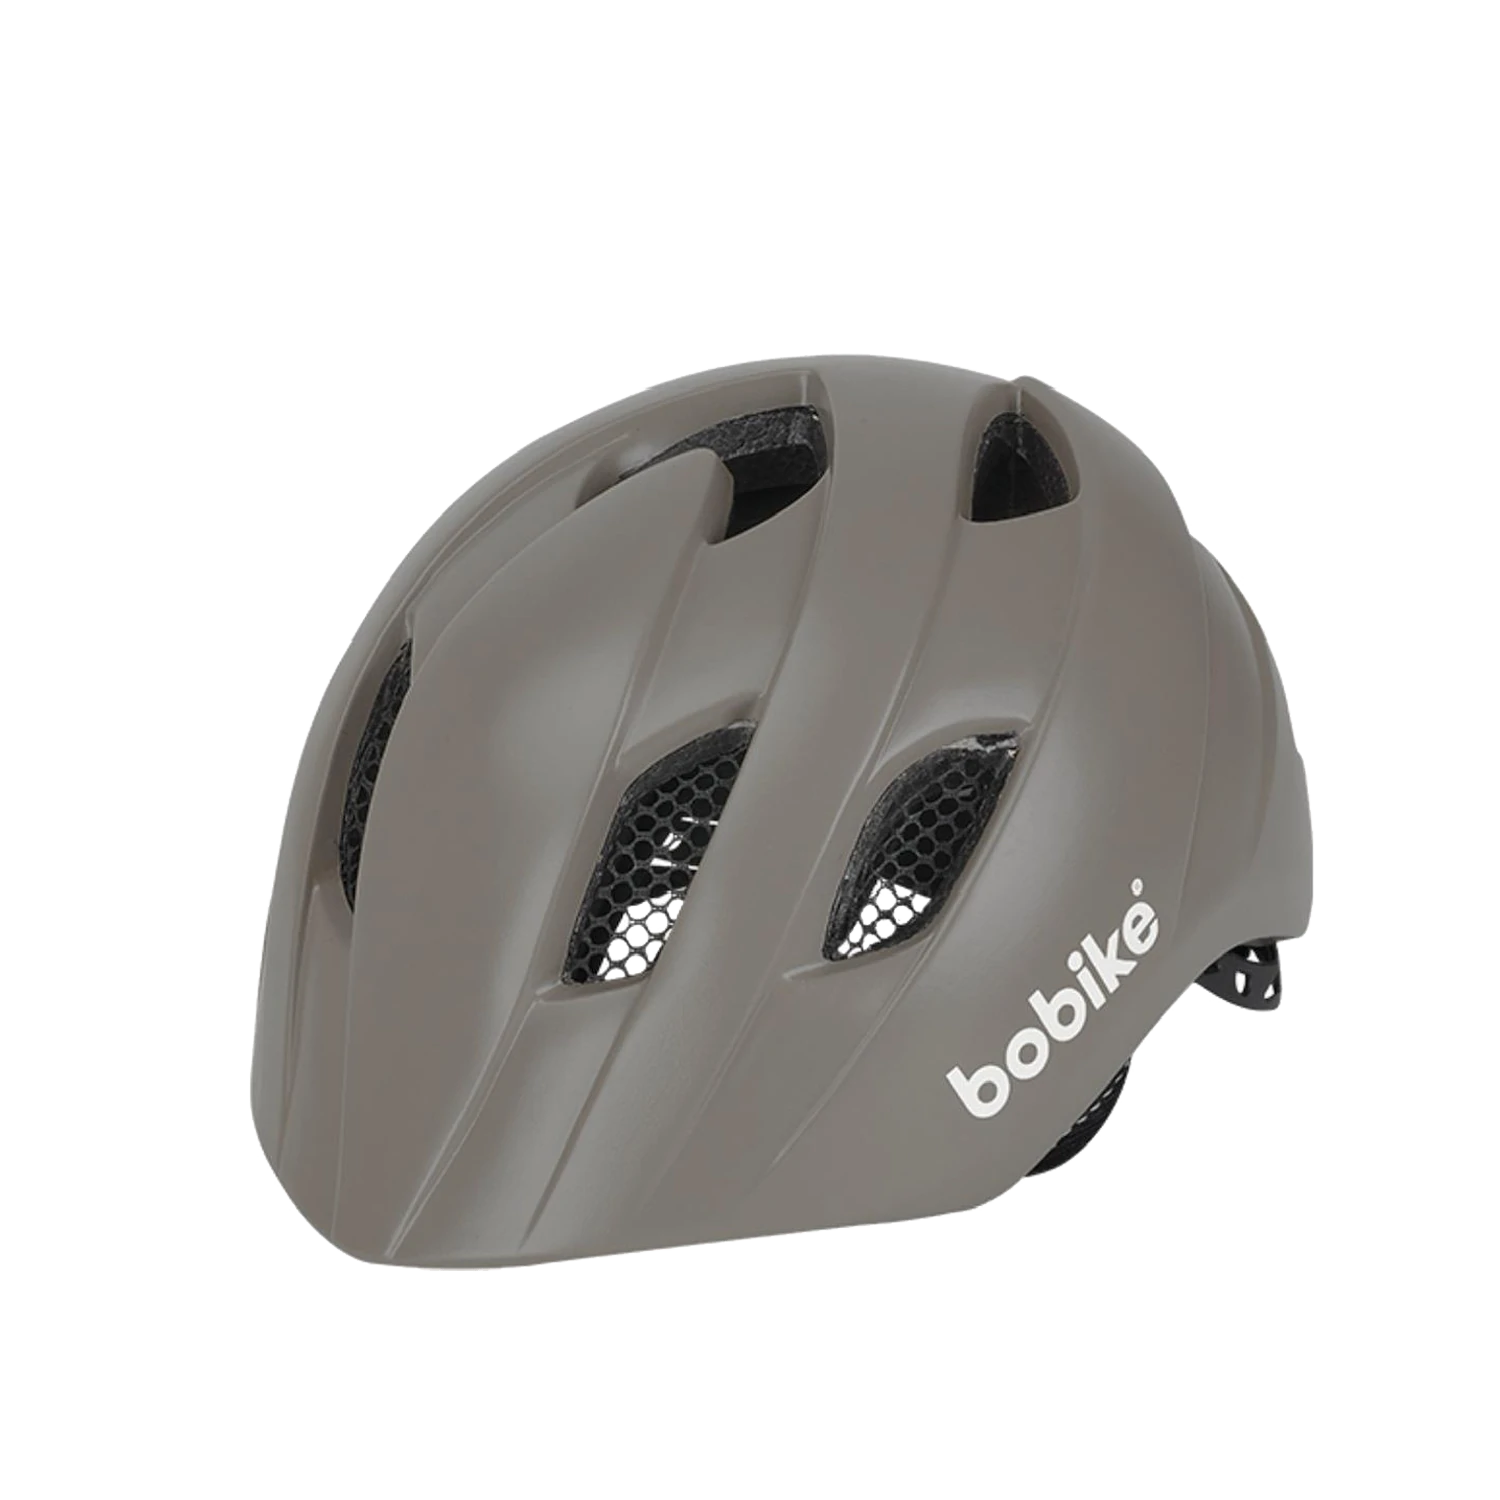 Kask Bobike Exclusive Plus S | Toffee Brown